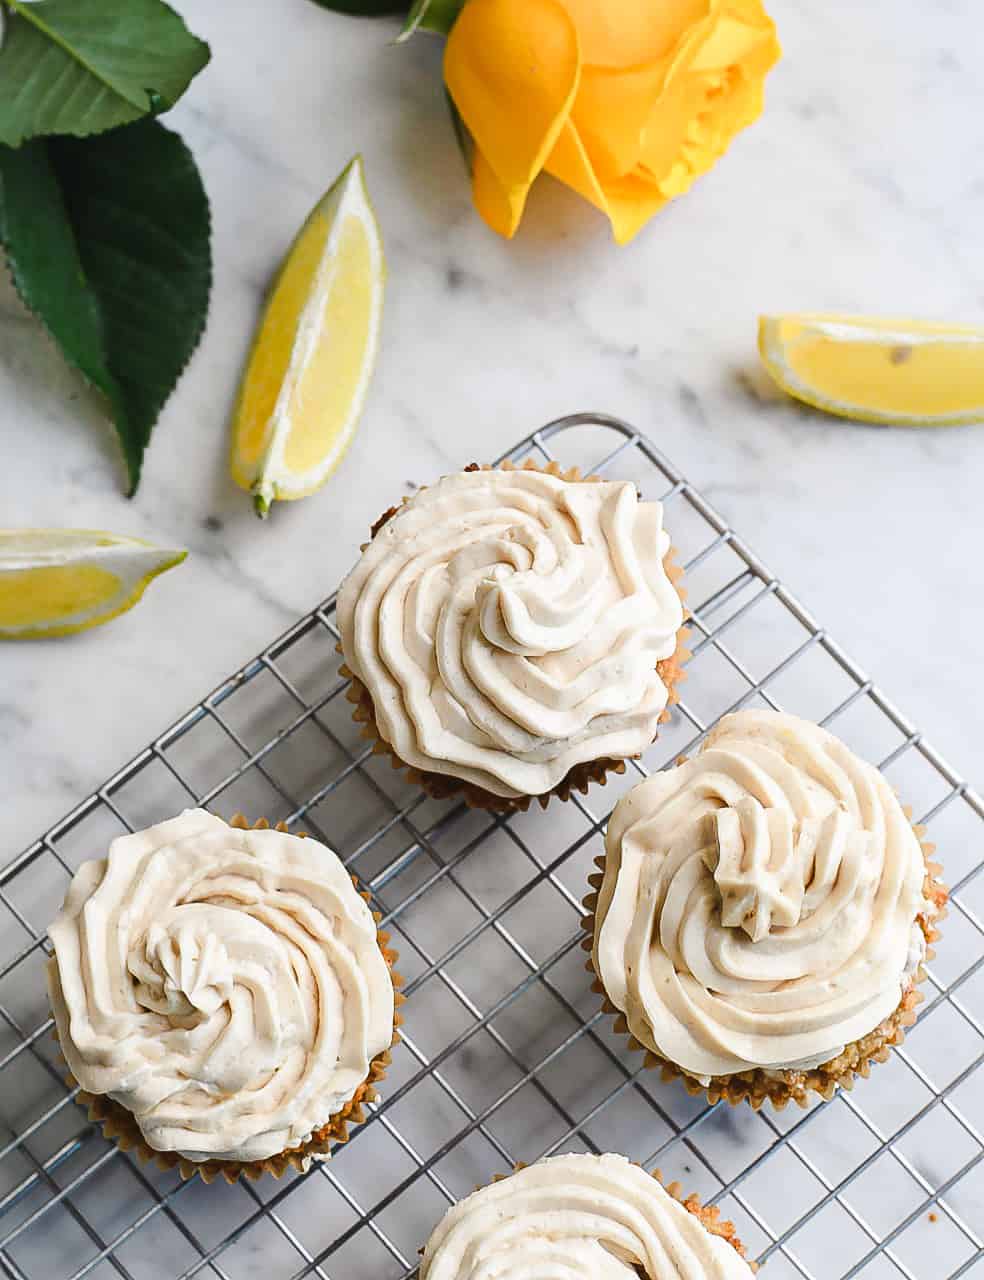 Lemon Cupcakes with Vanilla Frosting on wire rack